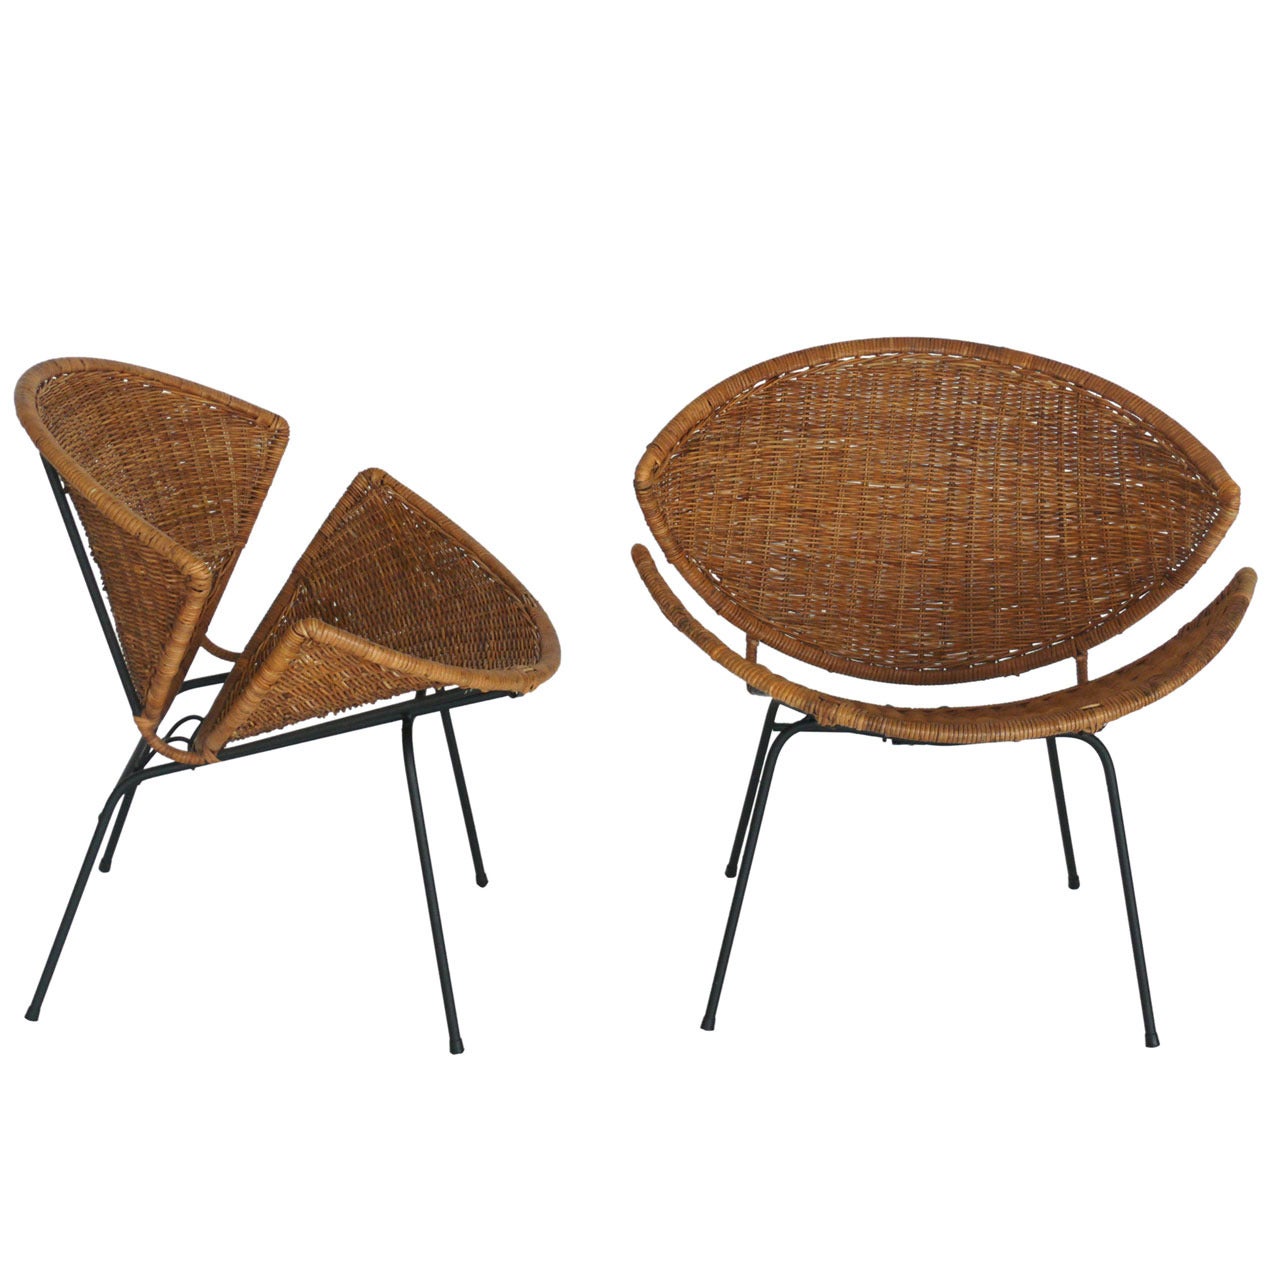 Wicker and Iron Scoop Chairs by John Salterini